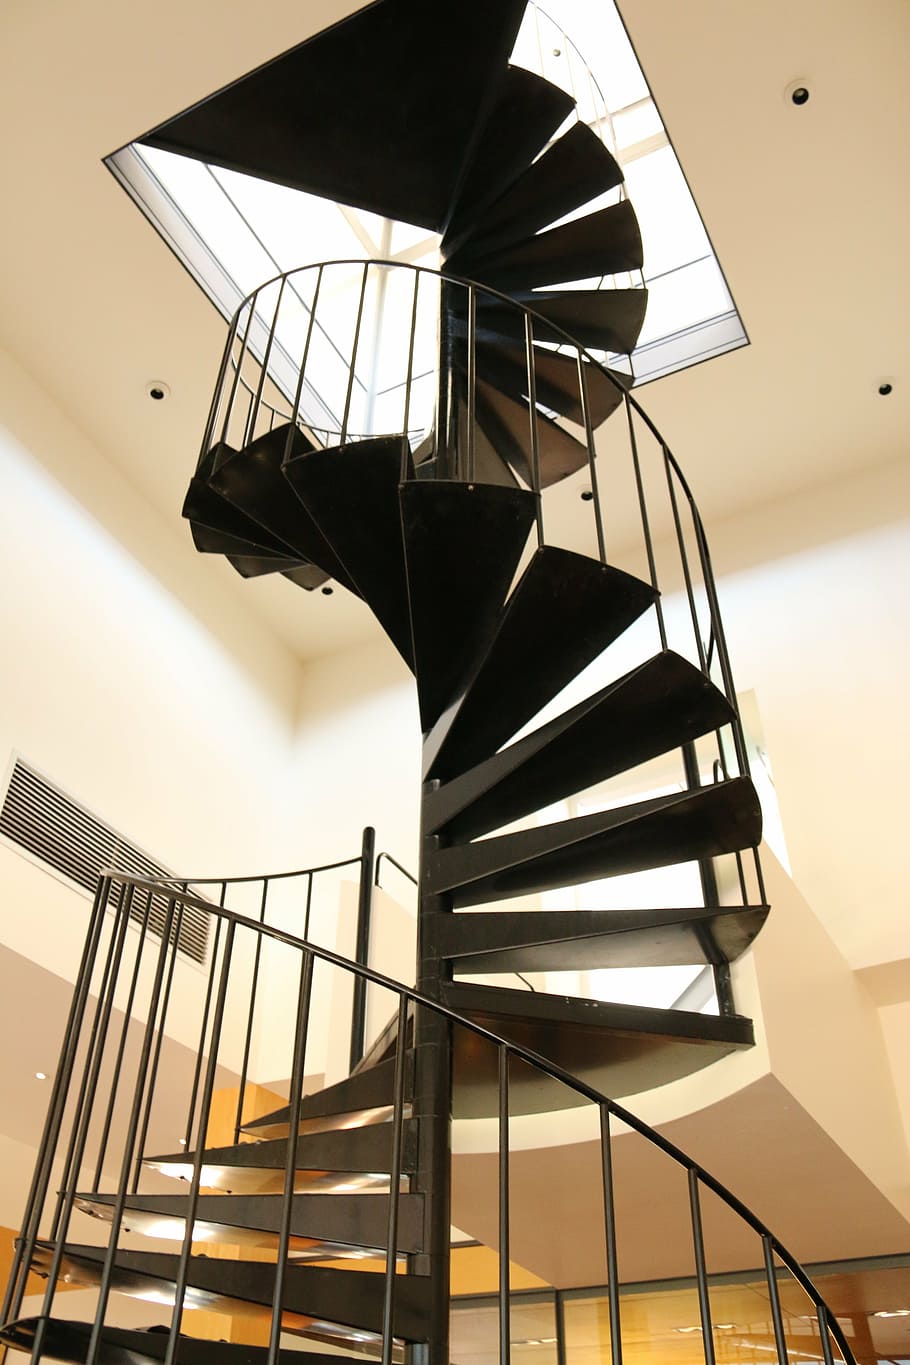 spiral staircase, stairs, staircase, architecture, spiral, bernard hoa, structure, black, black and white, interior perspective